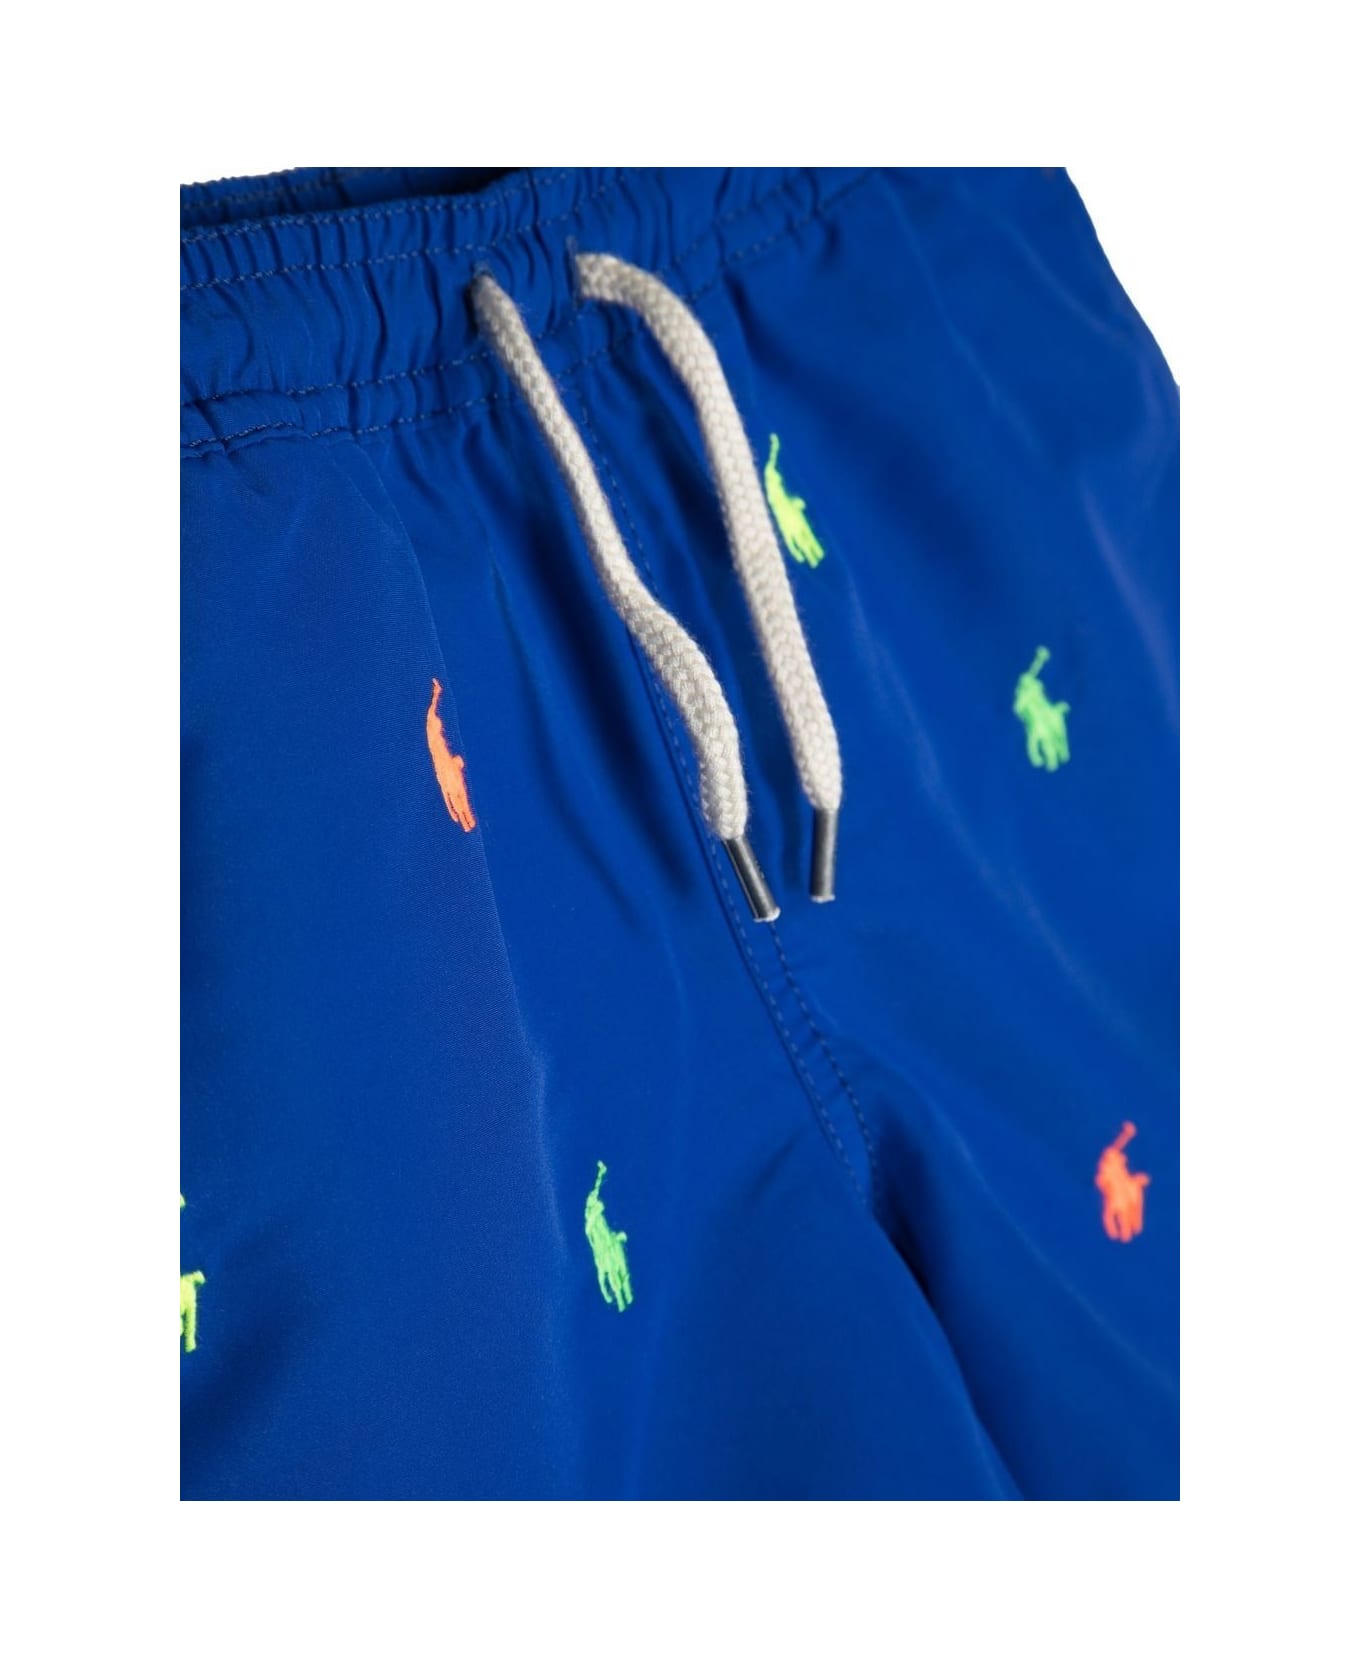 Polo Ralph Lauren Blue Swim Shorts With All-over Pony 水着